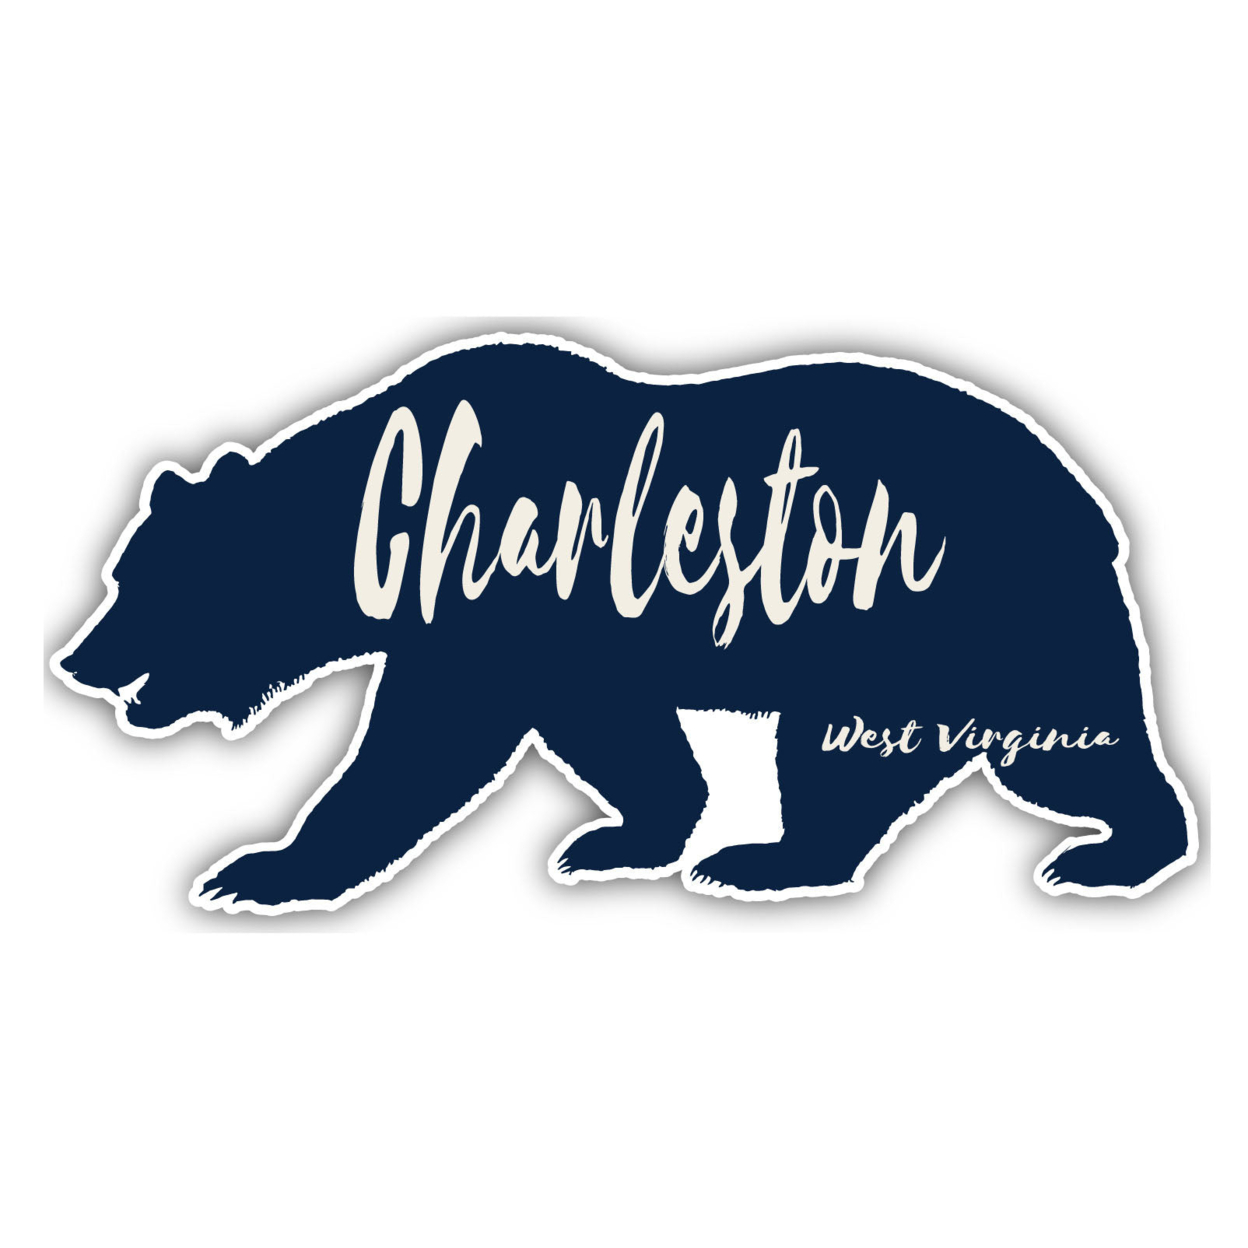 Charleston West Virginia Souvenir Decorative Stickers (Choose Theme And Size) - 4-Pack, 12-Inch, Bear